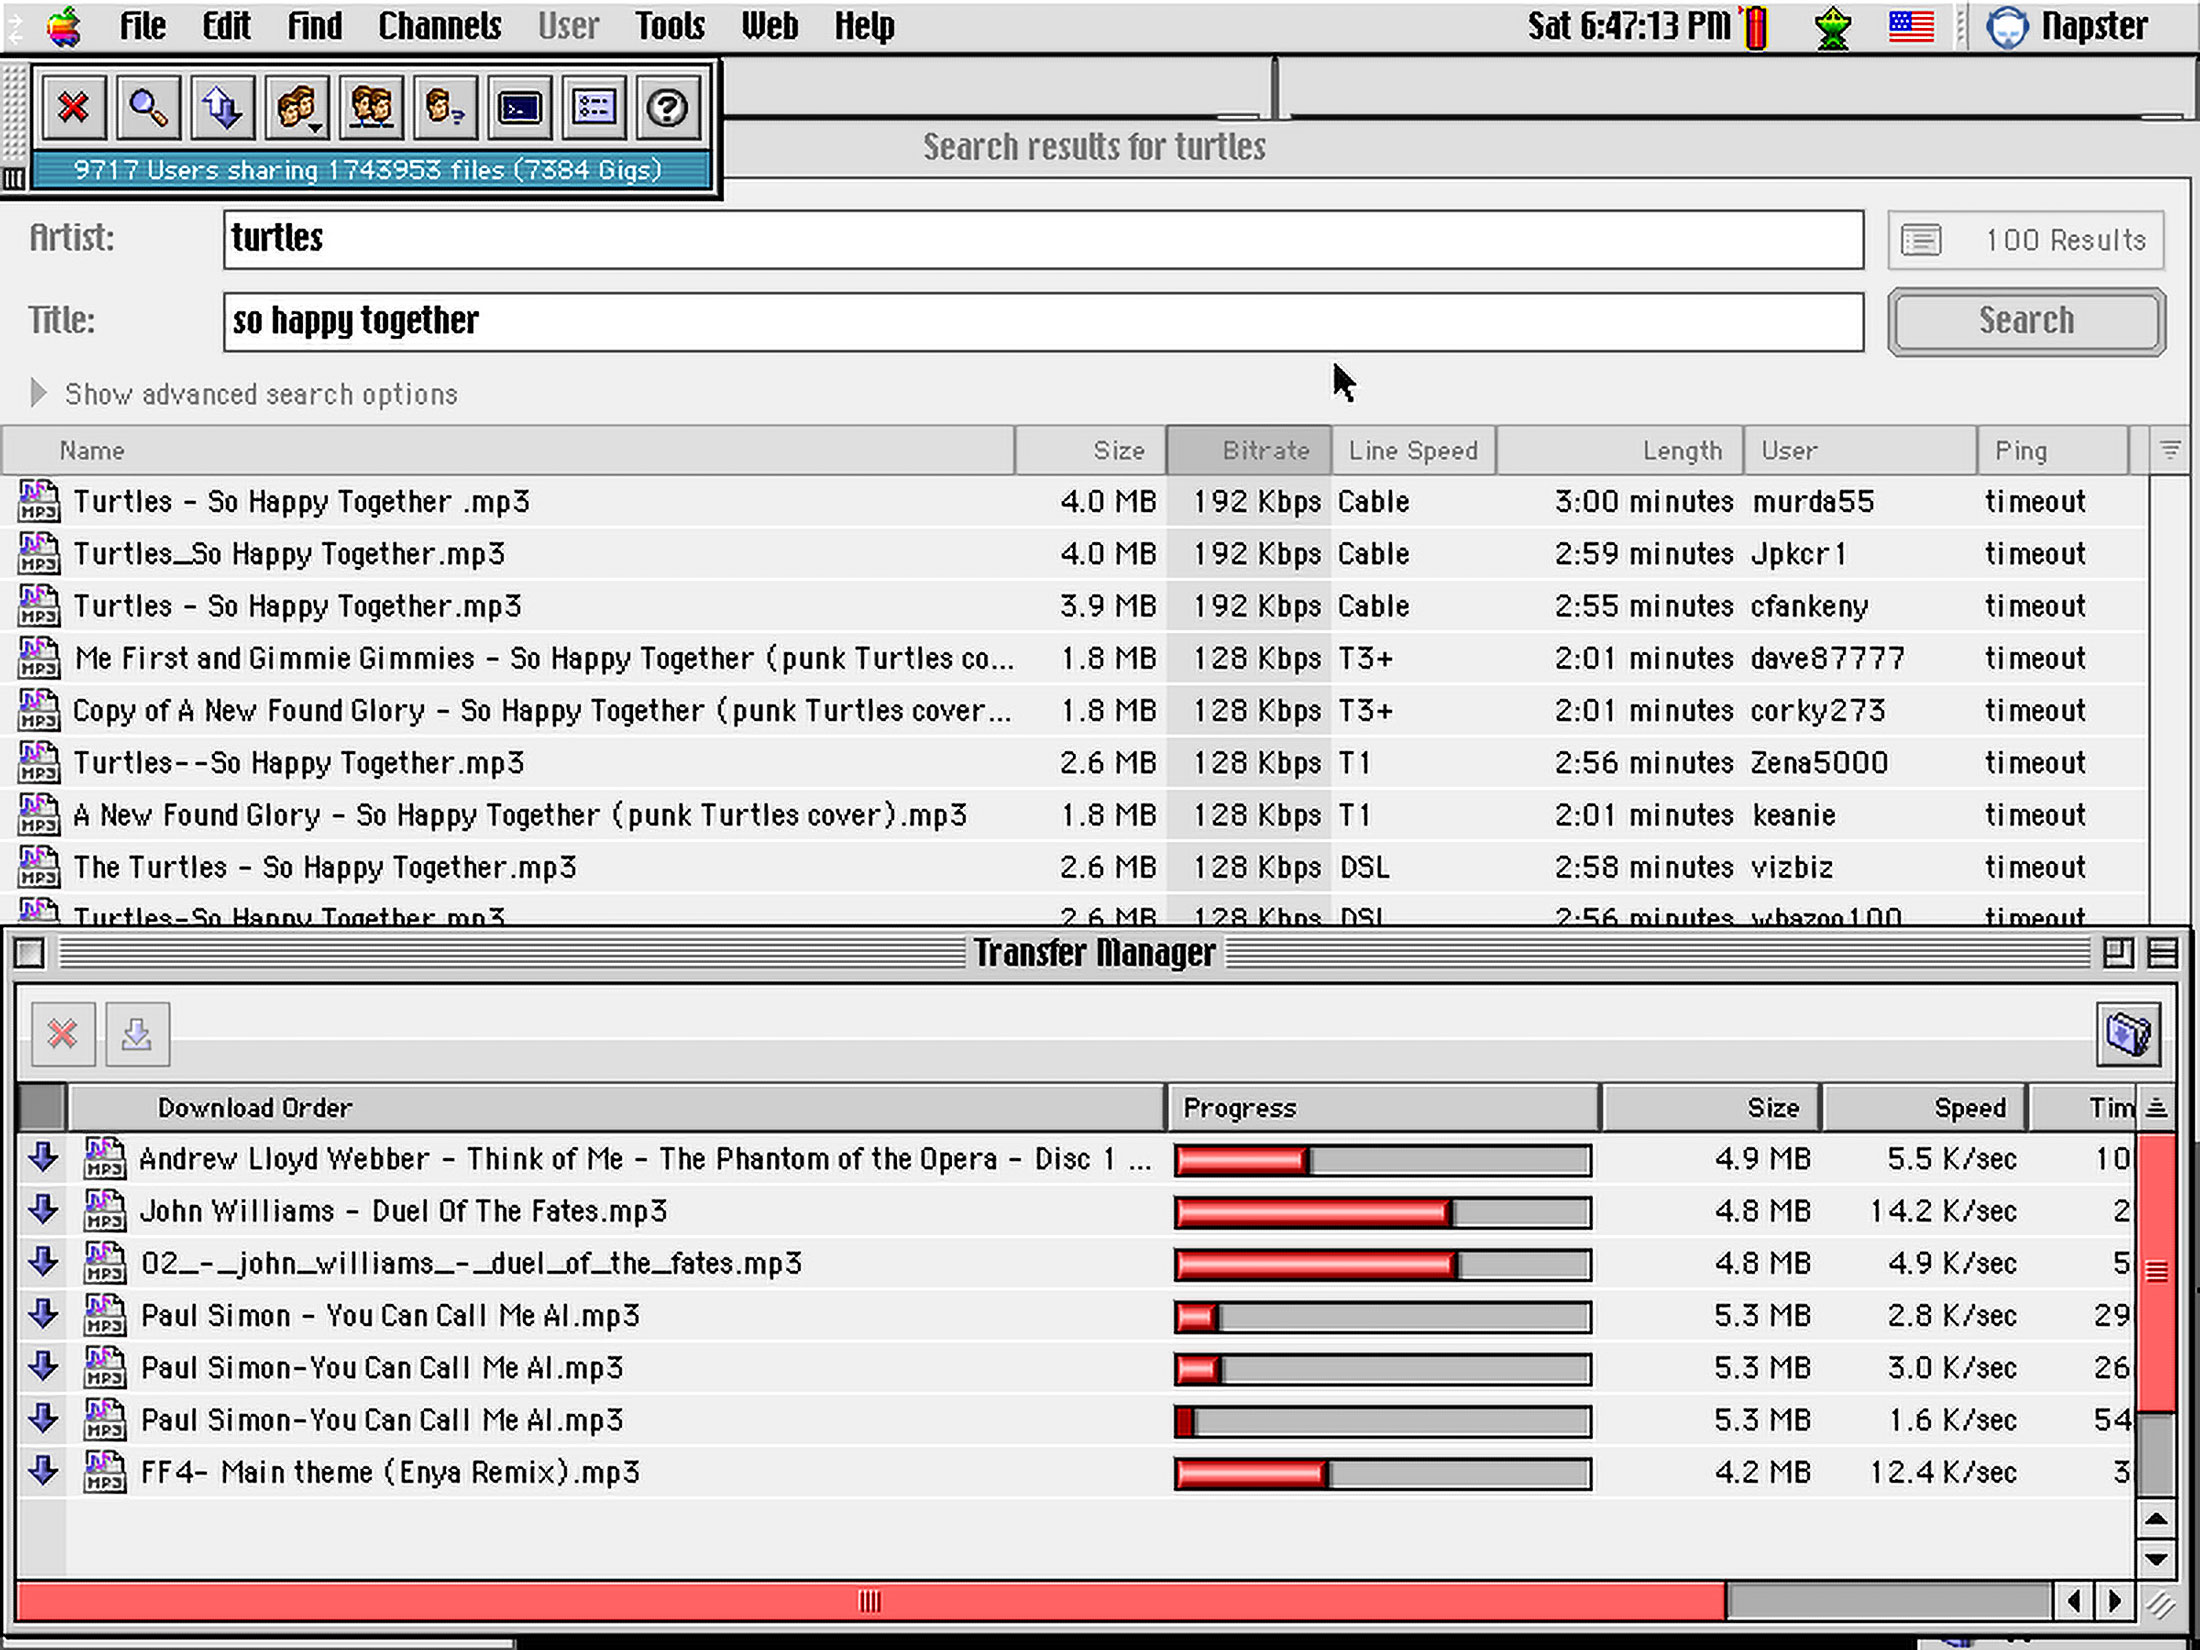 Screenshot of the Napster software running on Mac OS9, show a grey interface with the track title in small text on the left, then on the right, a red progress bar, showing when the tracks will be downloaded.